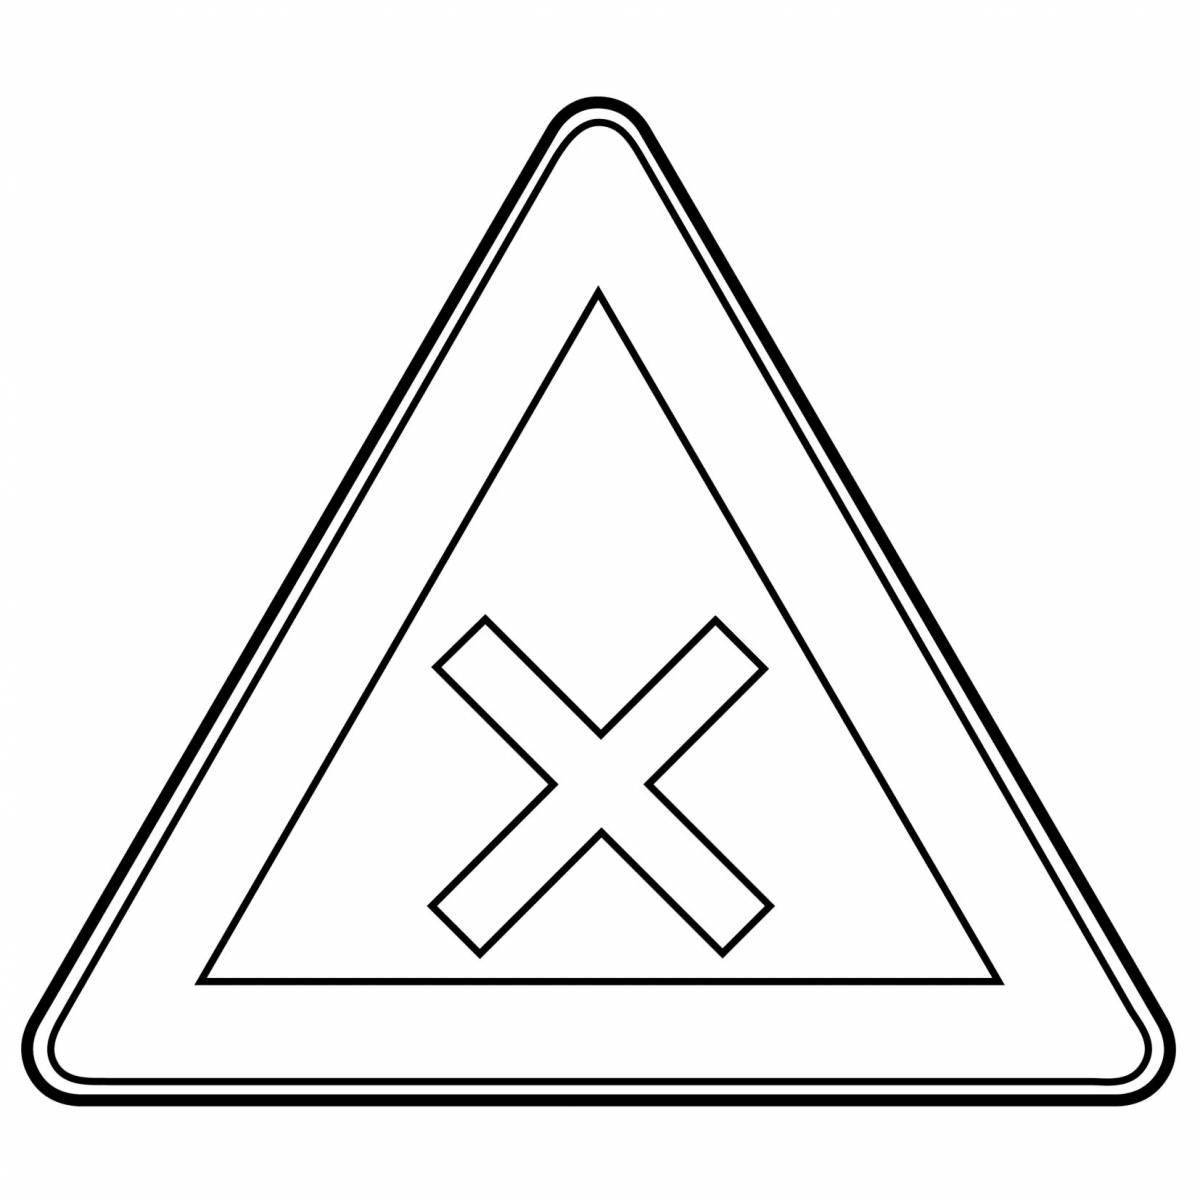 Attractive warning sign coloring page